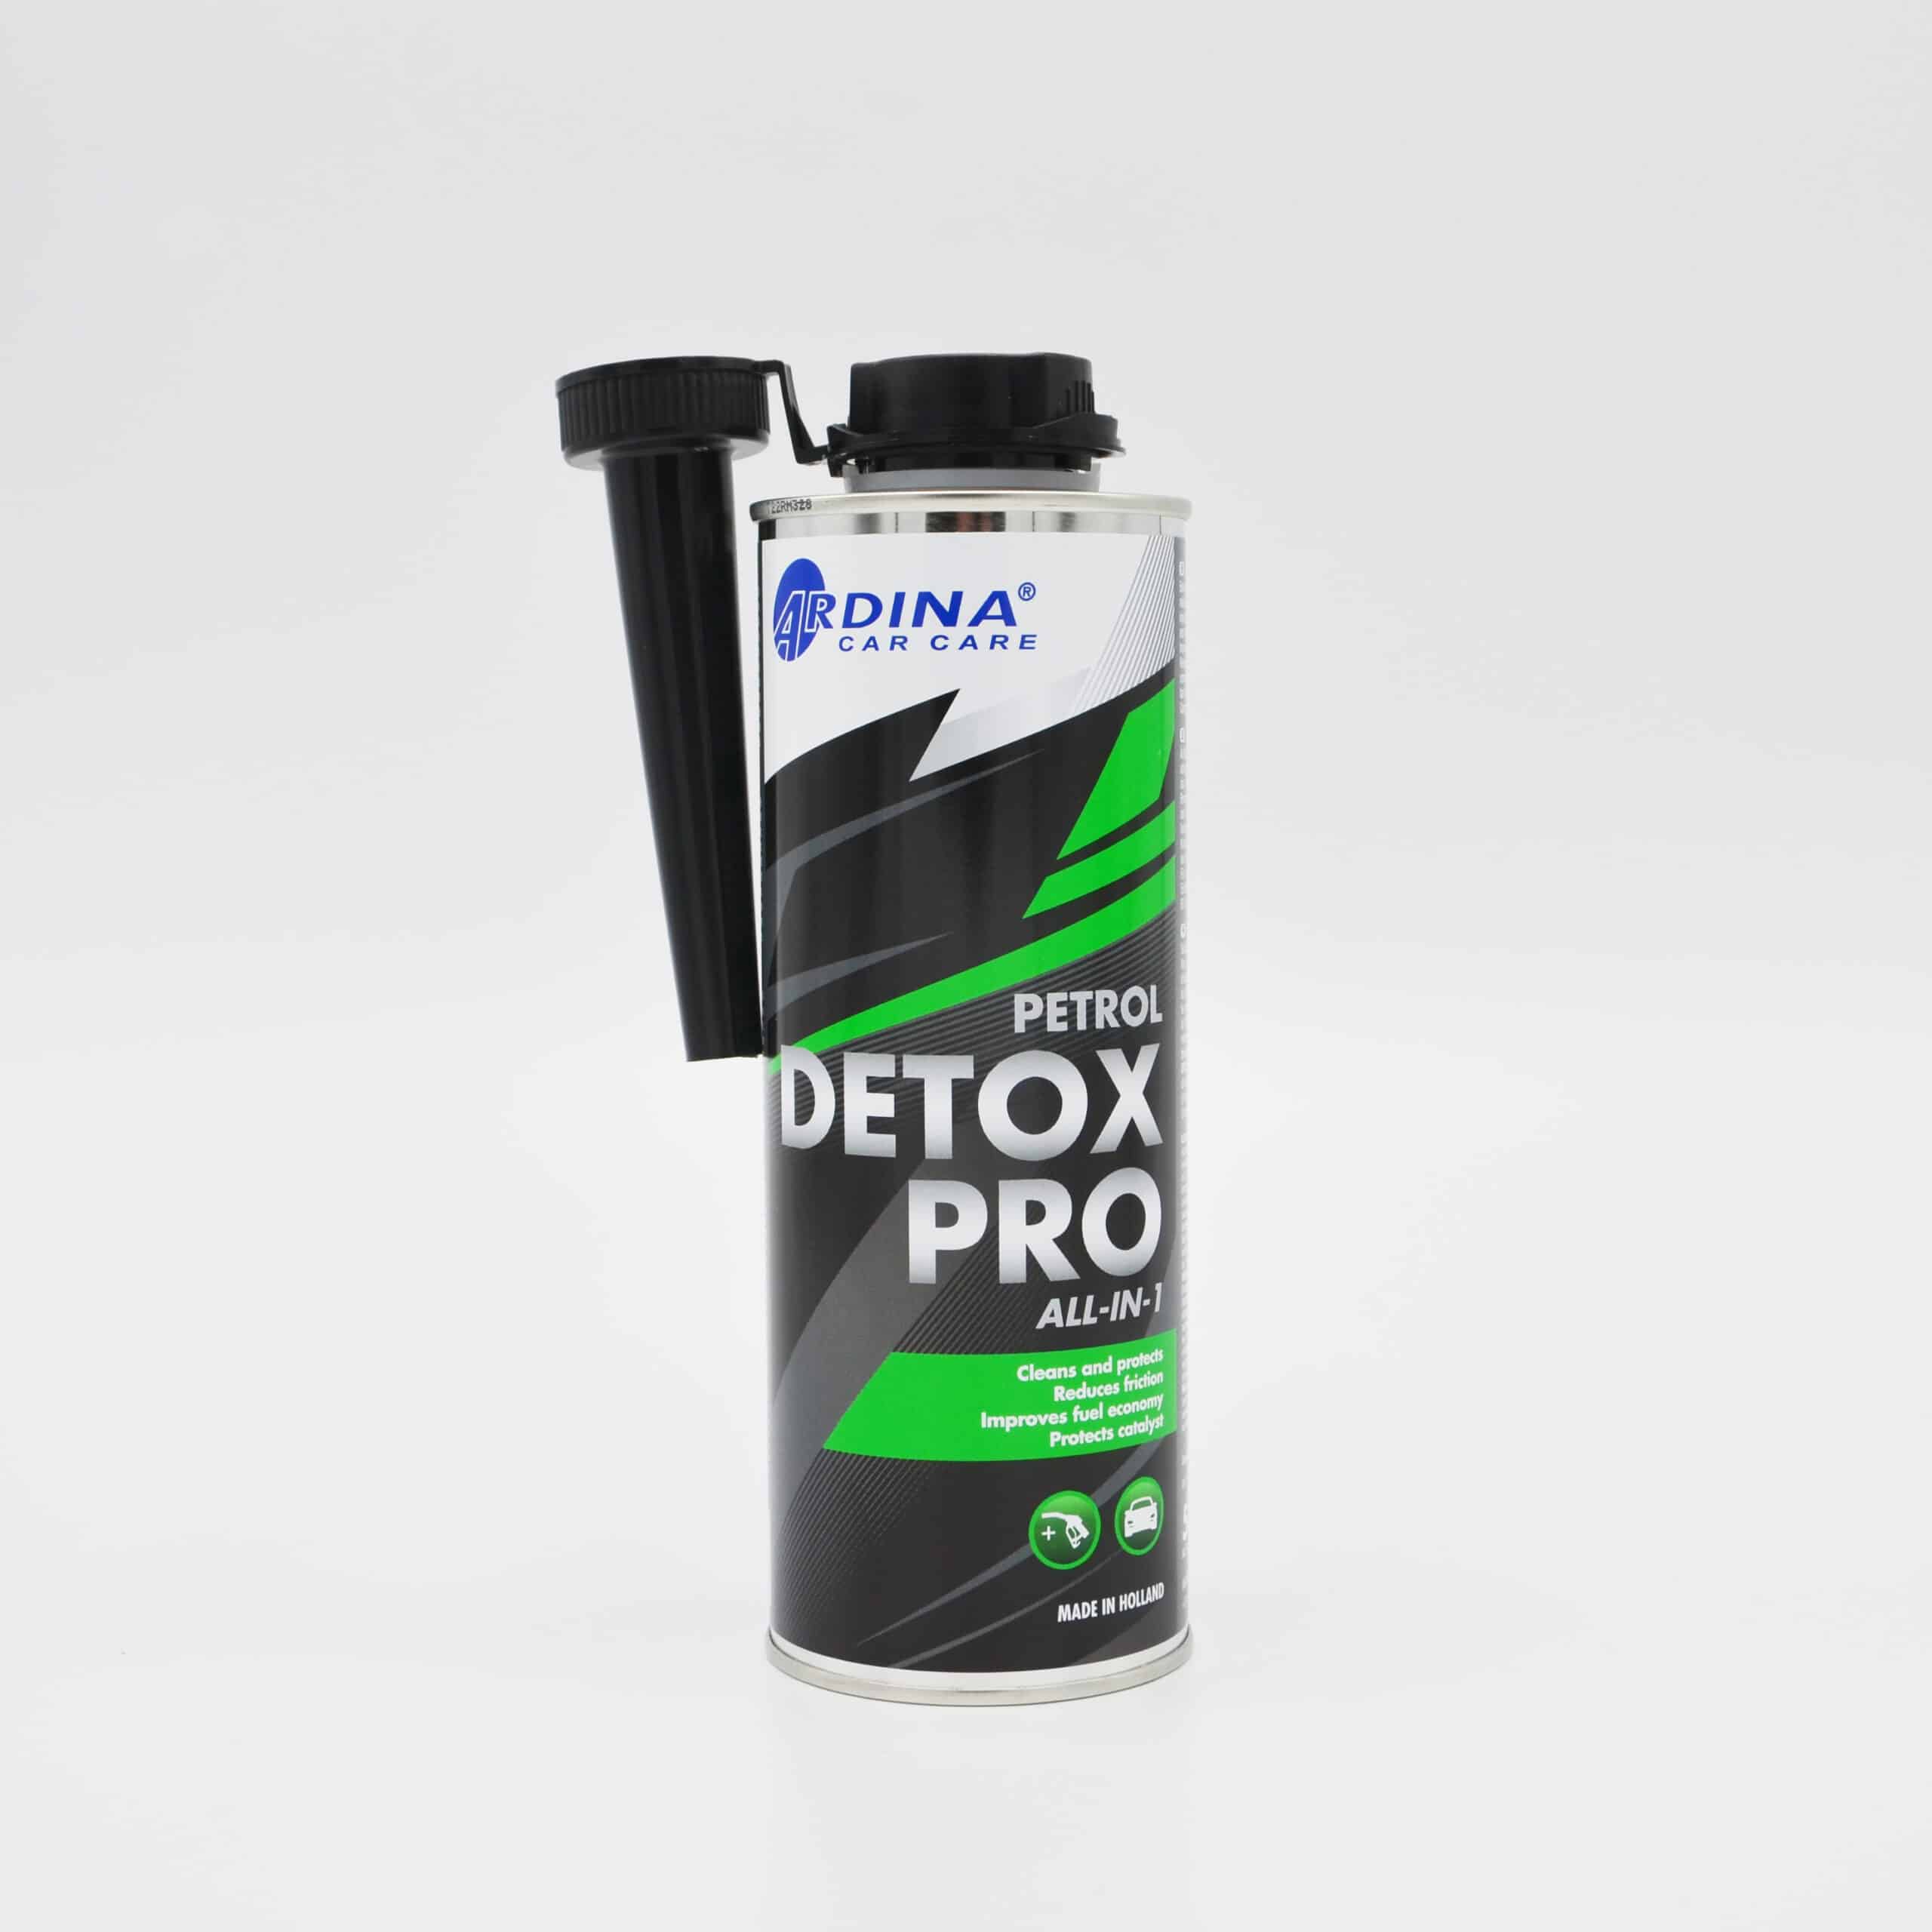 Petrol Detox Pro is an extremely effective problem solver for all petrol fuel related deposit problems.